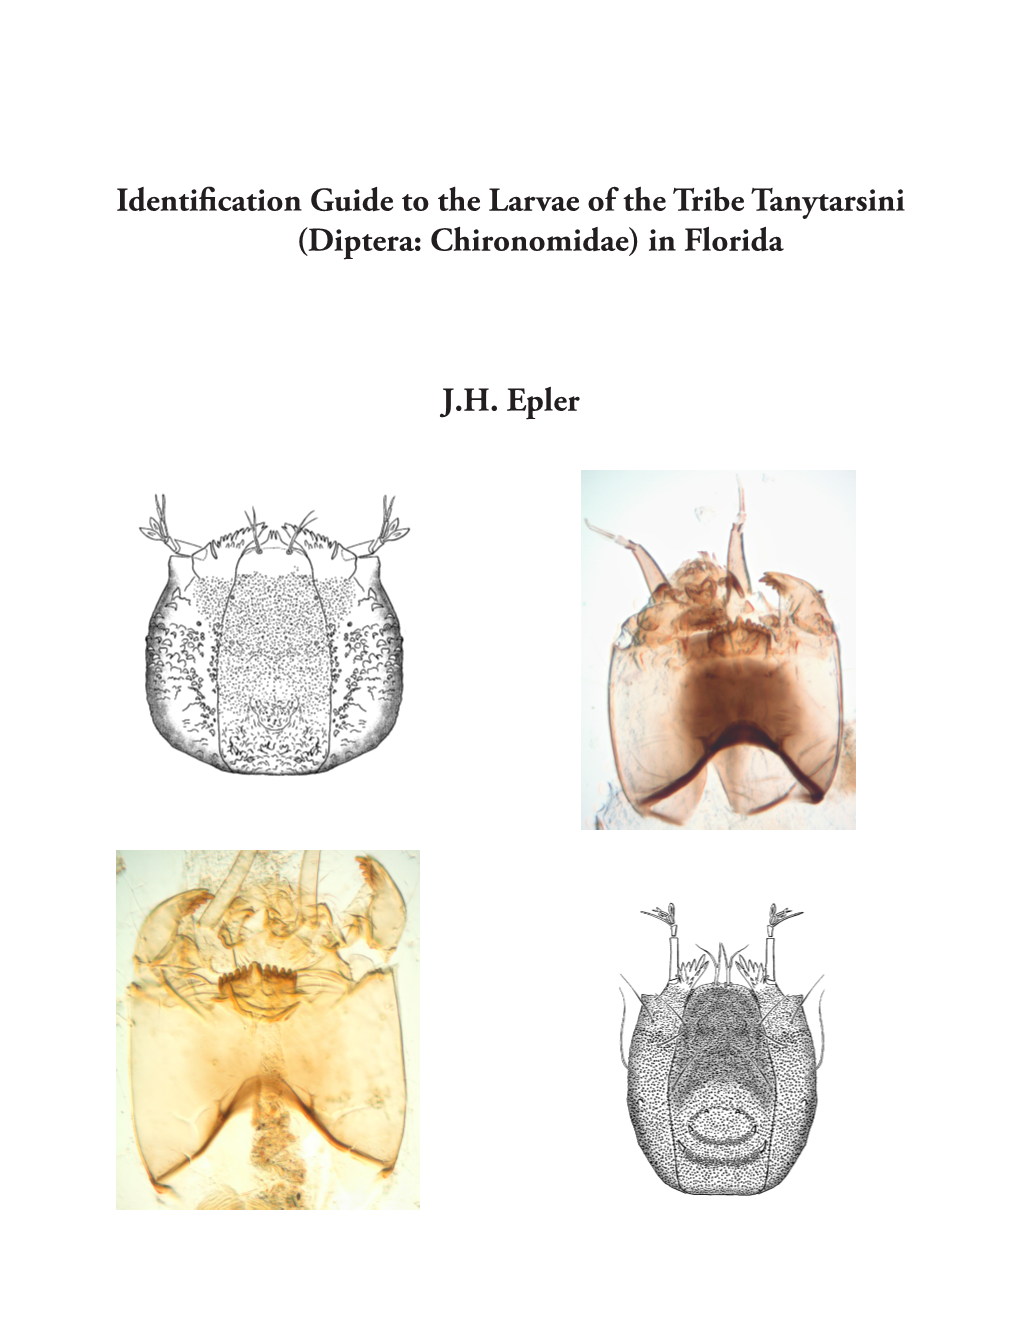 Identification Guide to the Larvae of the Tribe Tanytarsini (Diptera: Chironomidae) in Florida